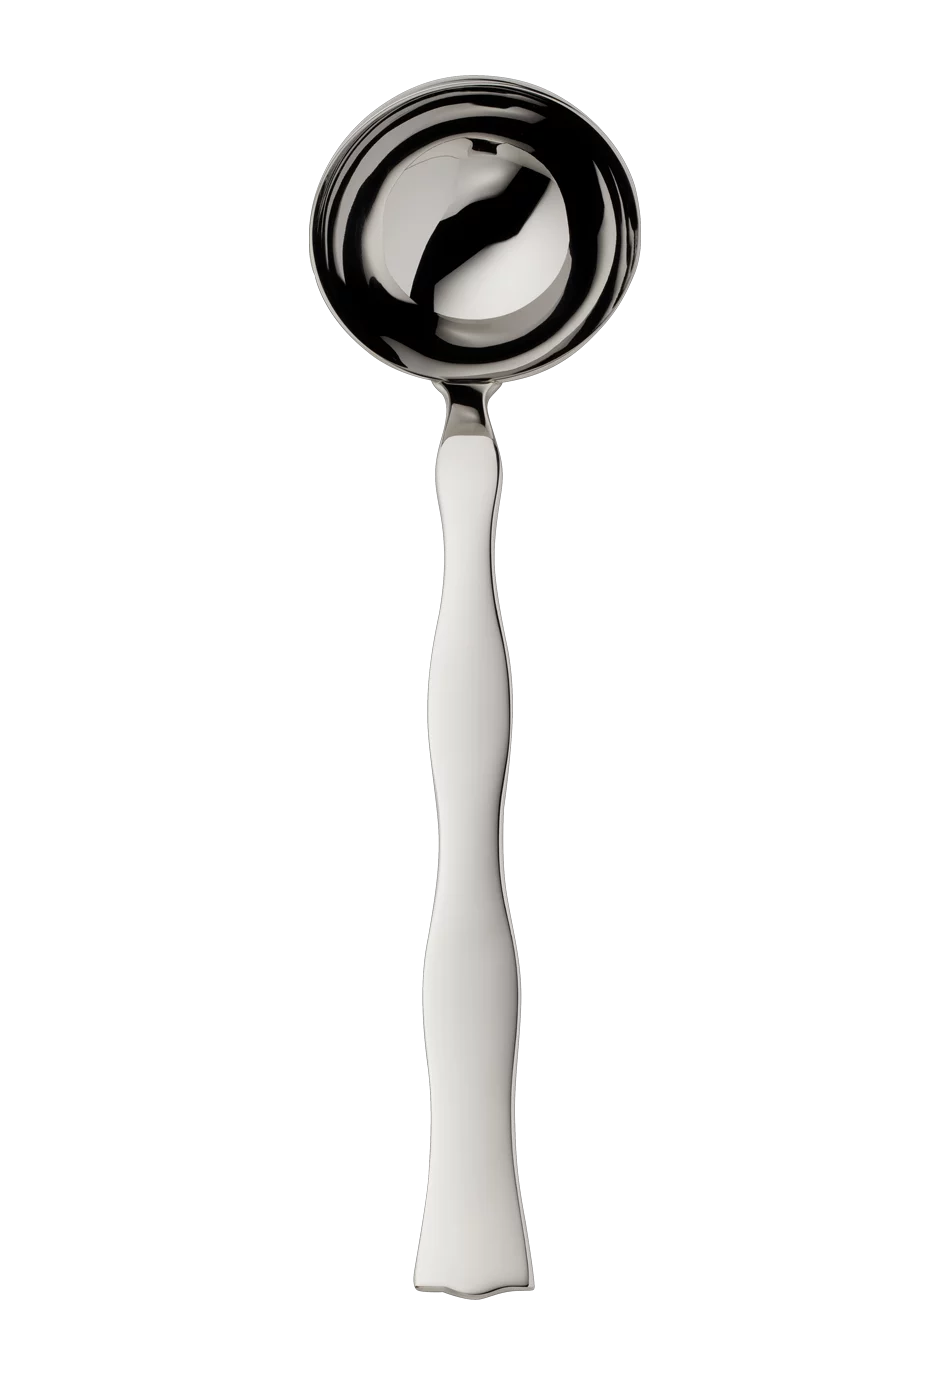 Lago Soup Ladle (18/8 stainless steel)